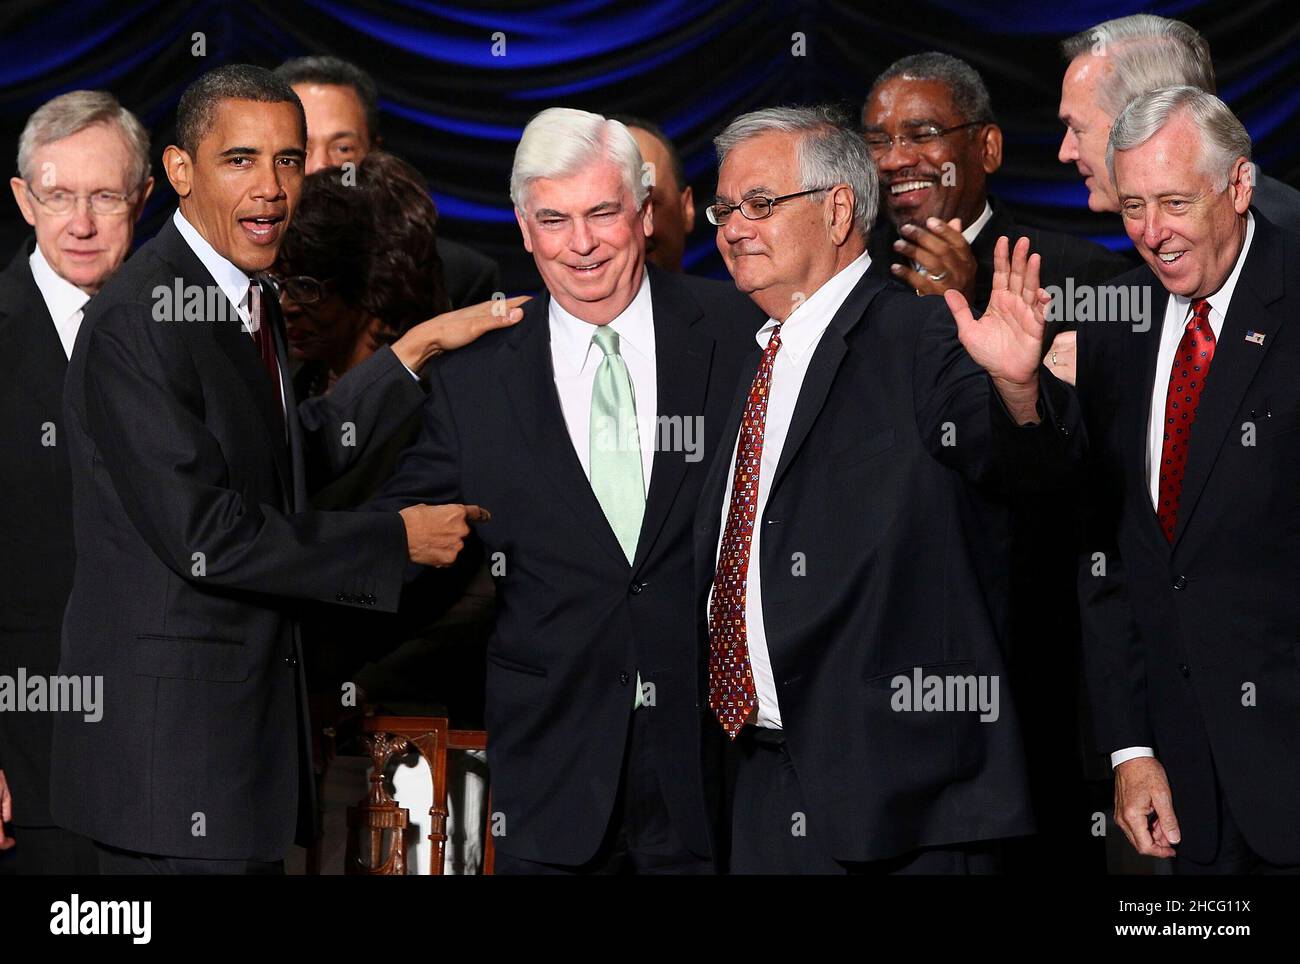 United States President Barack Obama (L) greets Rep. Barney Frank (R) (D-MA) and Sen. Chris Dodd (C) (D-CT) after signing the Dodd-Frank Wall Street Reform and Consumer Protection Act at the Ronald Reagan Building, Wednesday, July 21, 2010 in Washington, DC. The bill is the strongest financial reform legislation since the Great Depression and also creates a consumer protection bureau that oversees banks on mortgage lending and credit card practices. Also pictured are U.S. Senate Majority Leader Harry Reid (D-NV), far left, and U.S. House Majority Leader Steny Hoyer (D-MD), far right.Credit: W Stock Photo